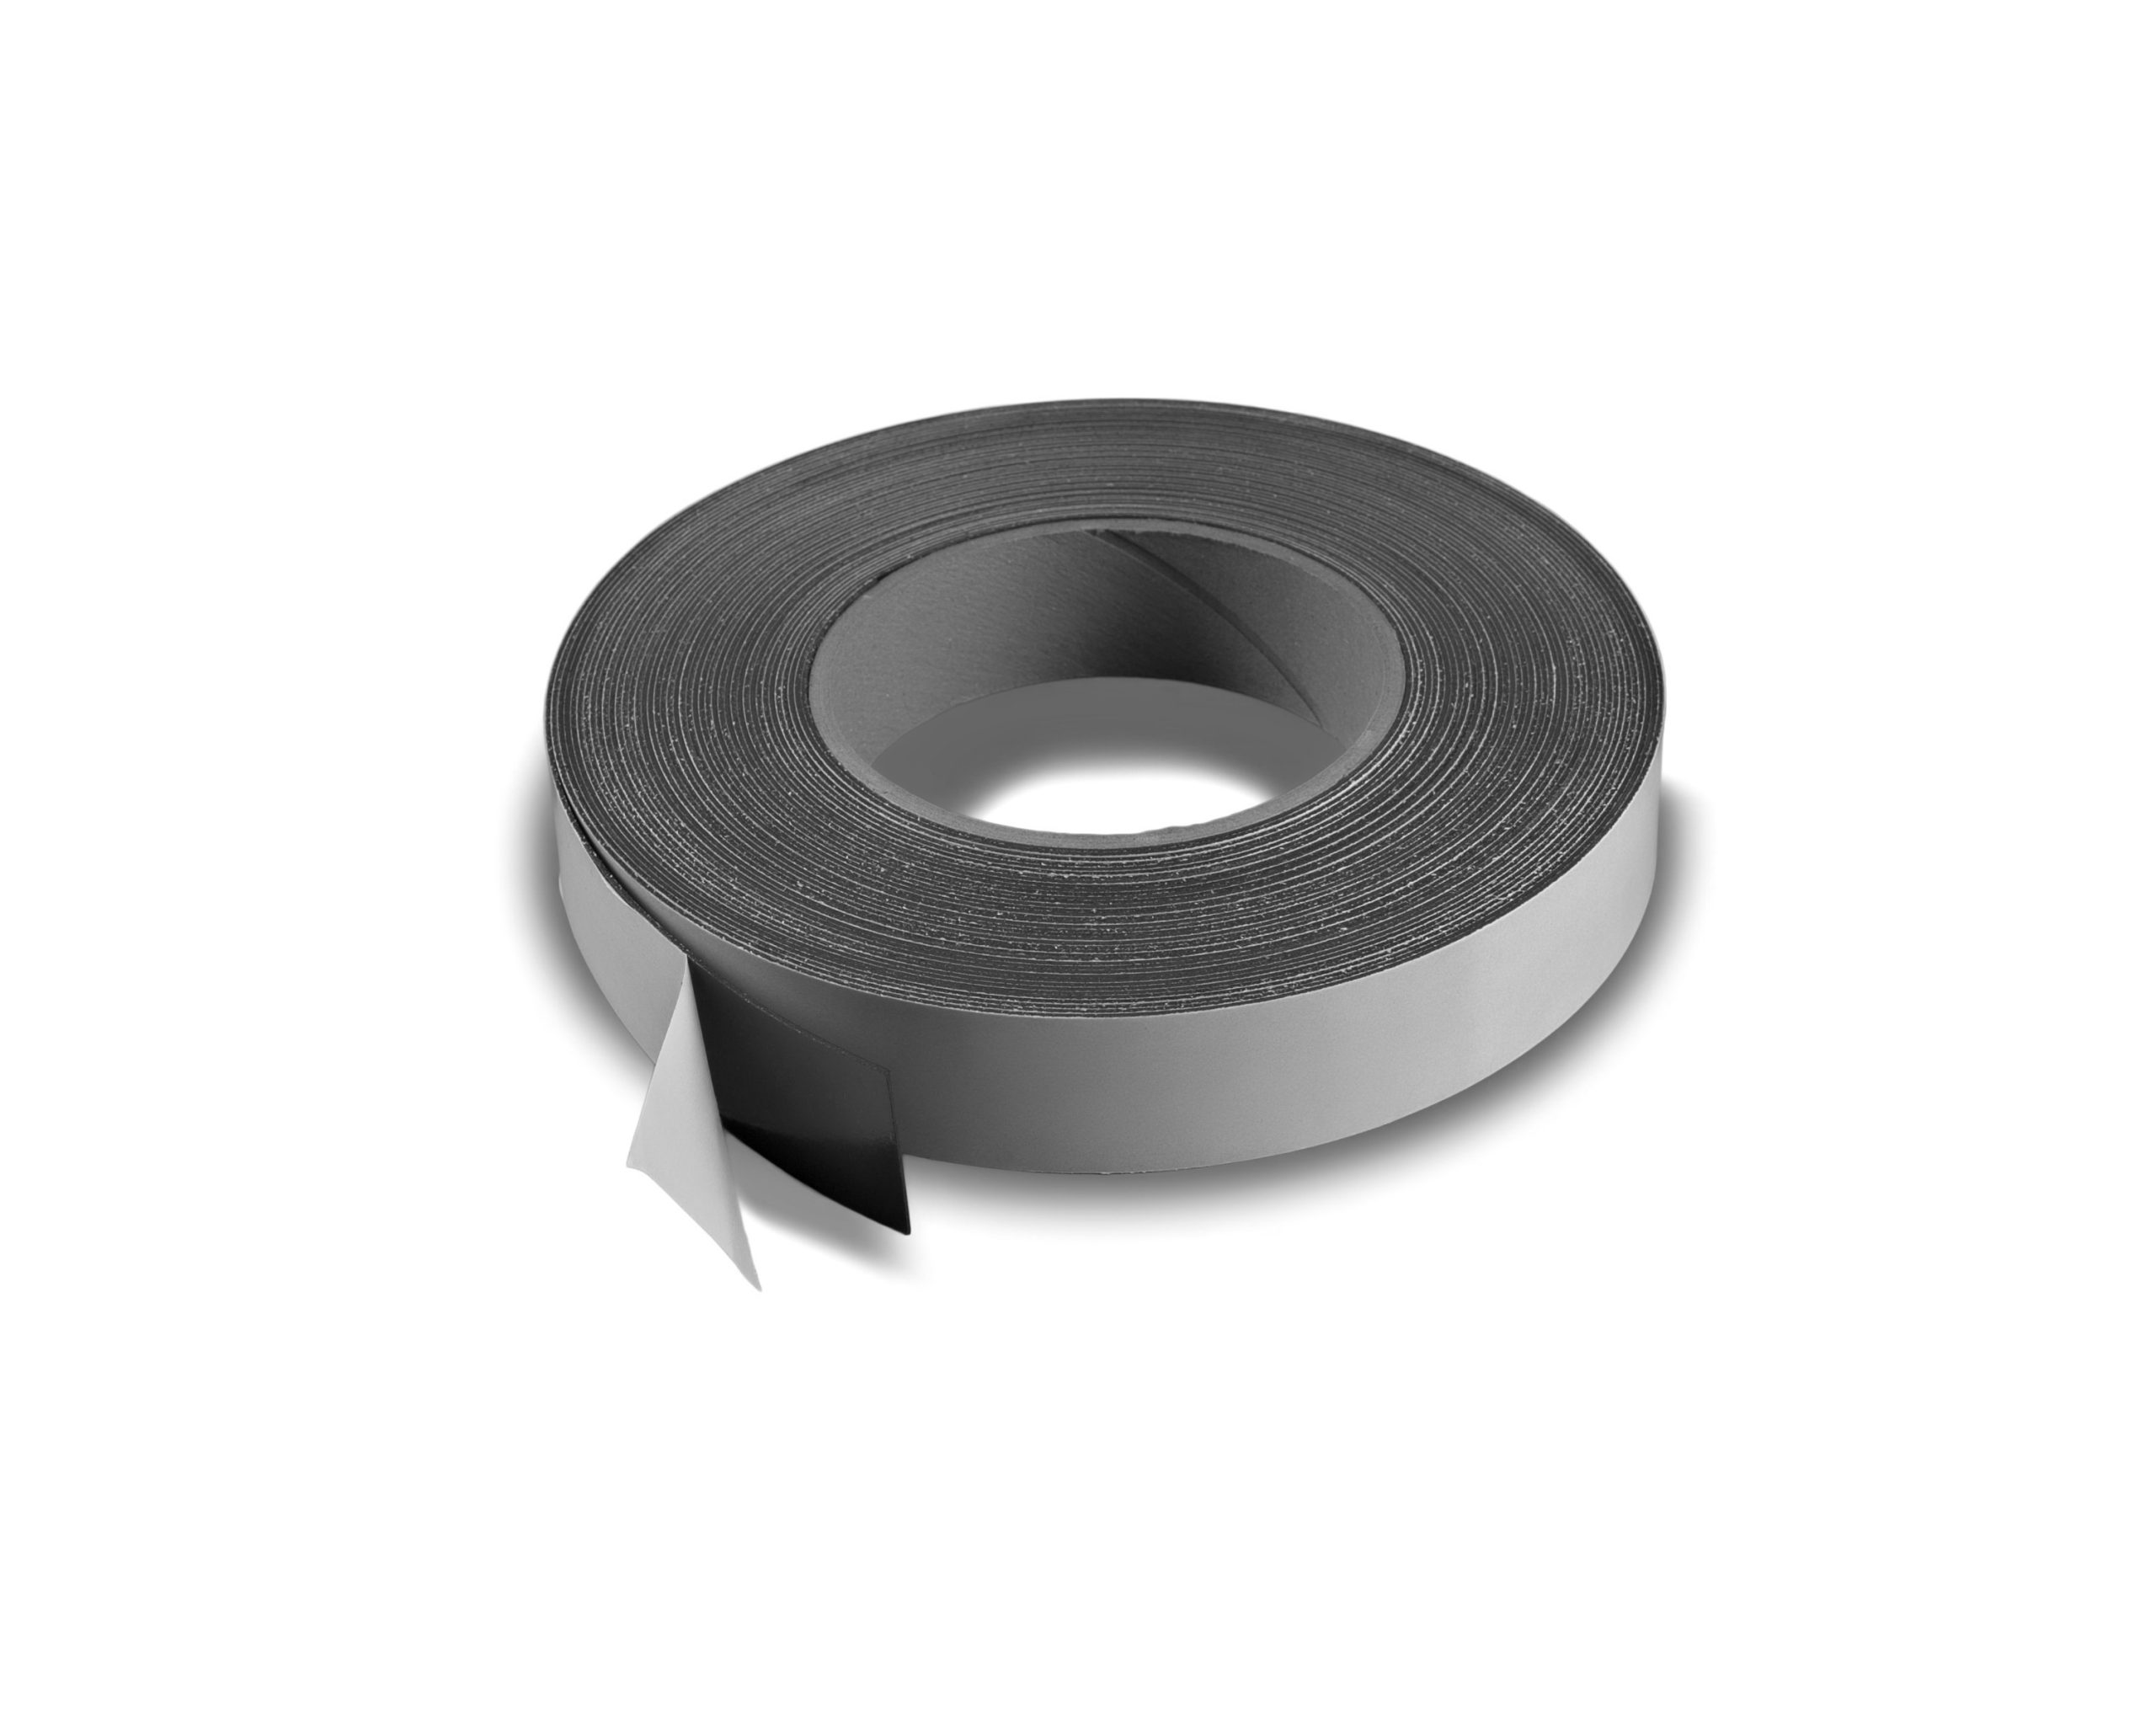 Self-adhesive Tape and Strip Magnets